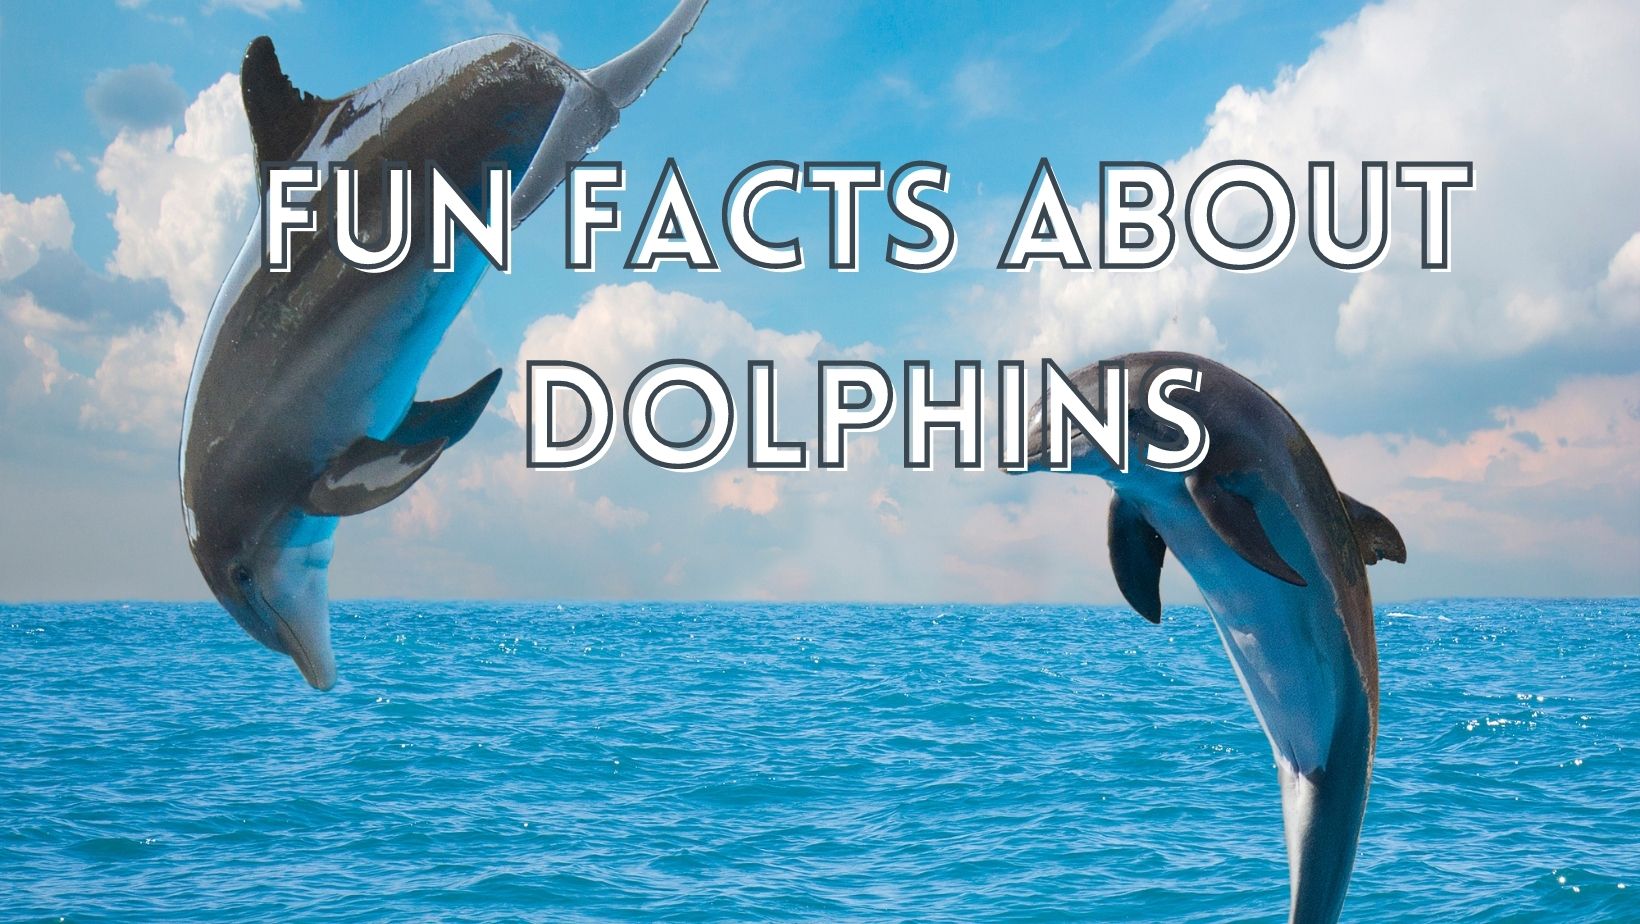 Amazing dolphin fun facts